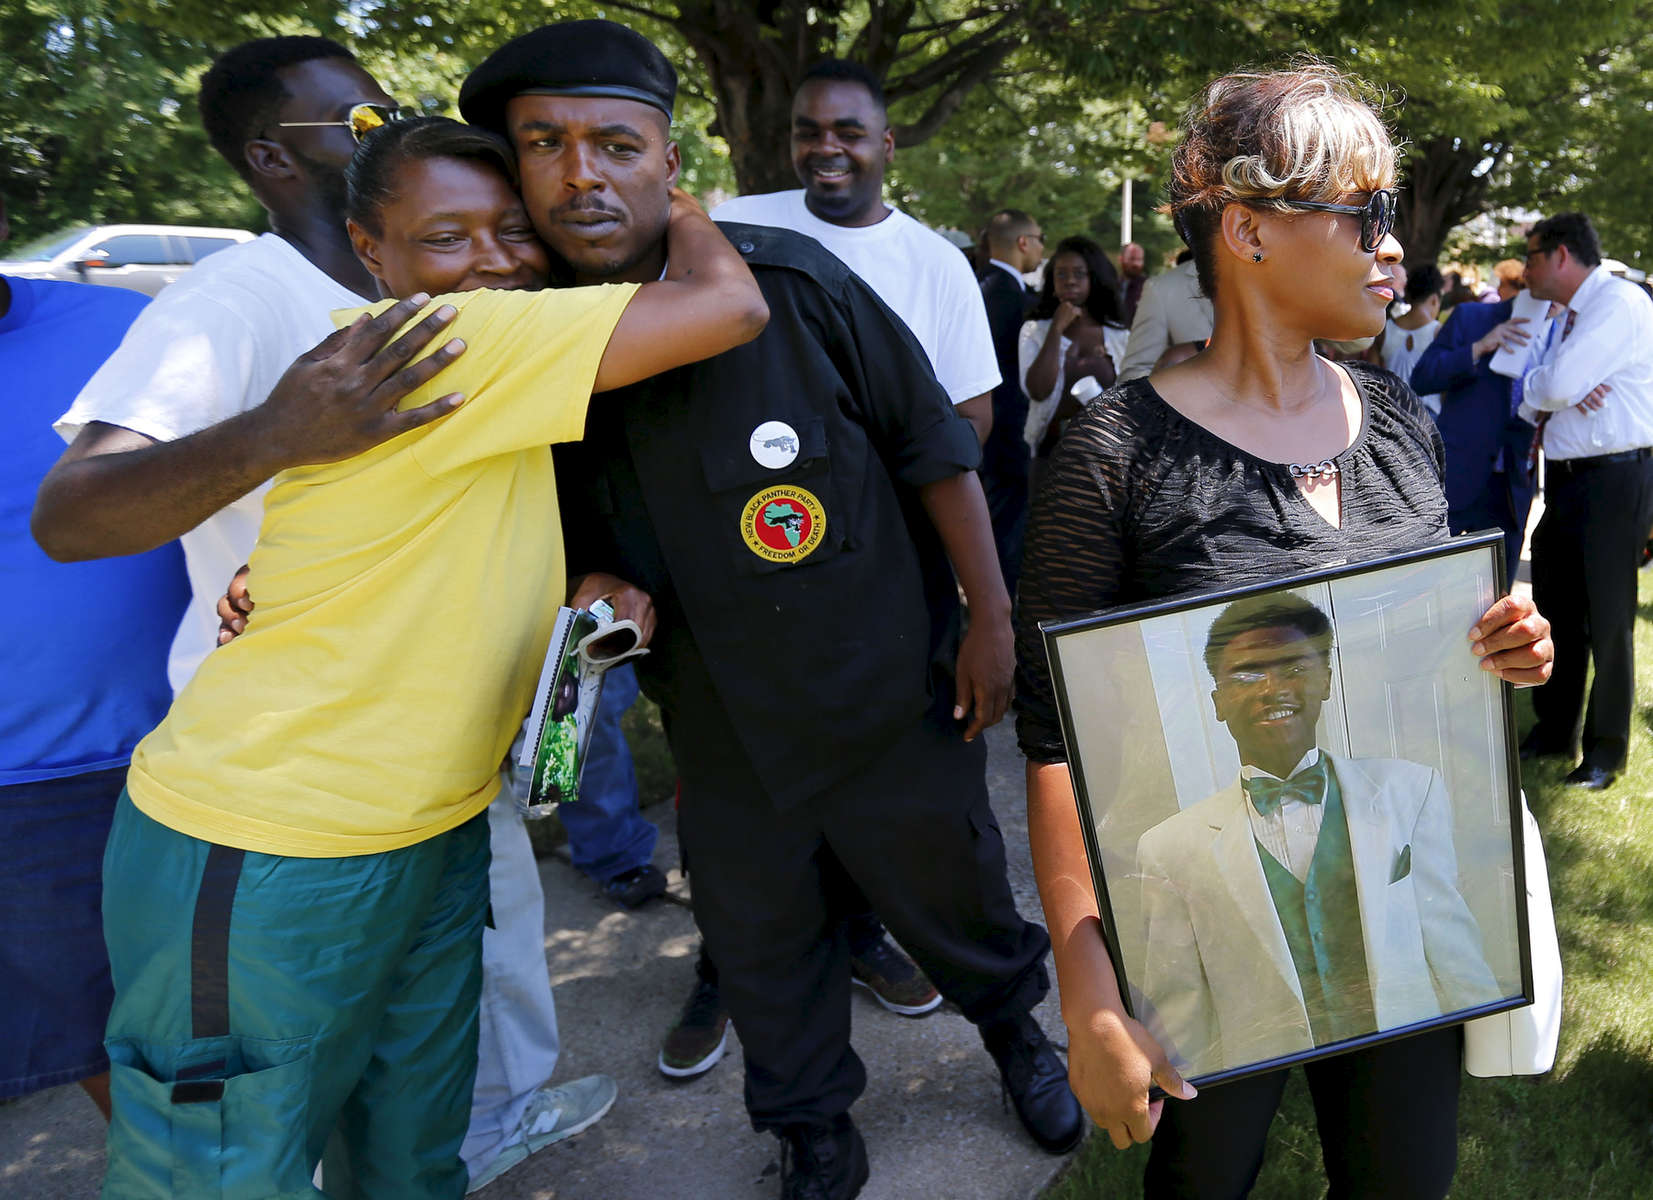 July 13, 2016 - Mary Stewart (right) holds a photo of her son, Darrius Stewart, before a press conference outside The Commercial Appeal. Attorneys for the family of Darrius Stewart announced they have filed a $17 million wrongful death lawsuit against former police director Toney Armstrong and former MPD officer Connor Schilling and the City of Memphis. Stewart was killed during a traffic stop on July 17, 2015. (Mike Brown/The Commercial Appeal)